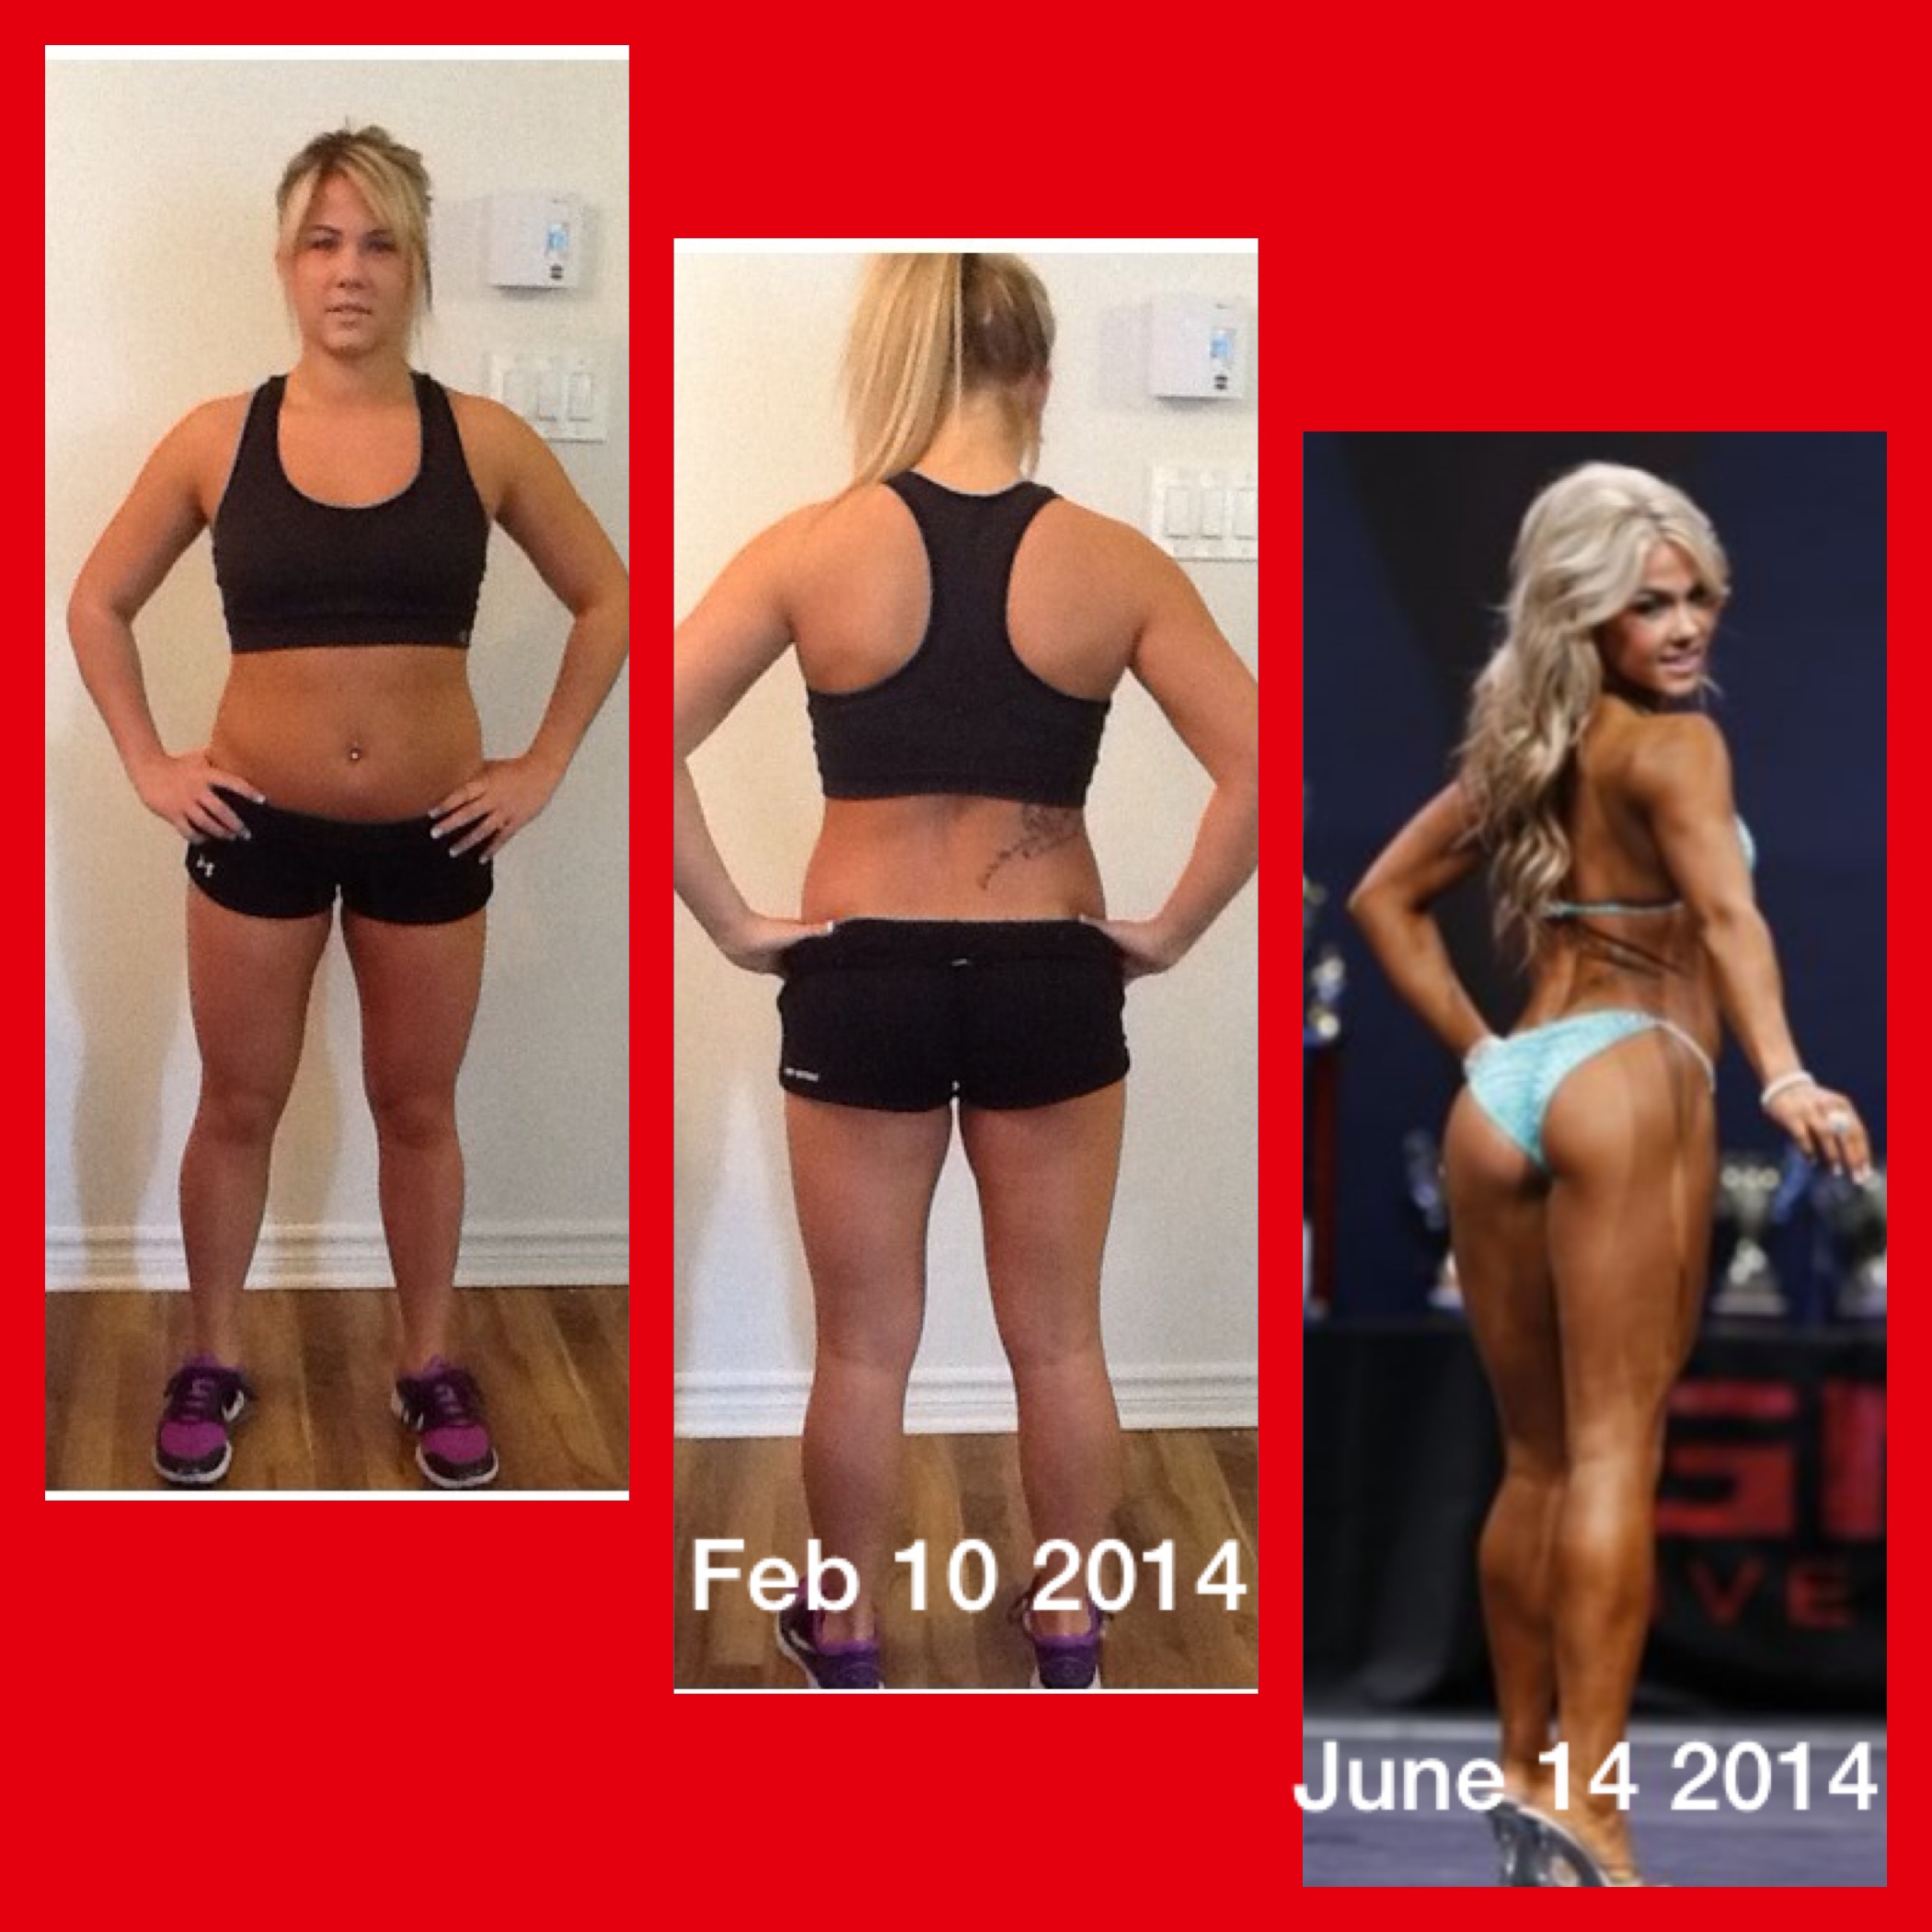 Brittany Moran - 2014 Ottawa Classic Bikini Overall Champion. Before and After 5 months later.